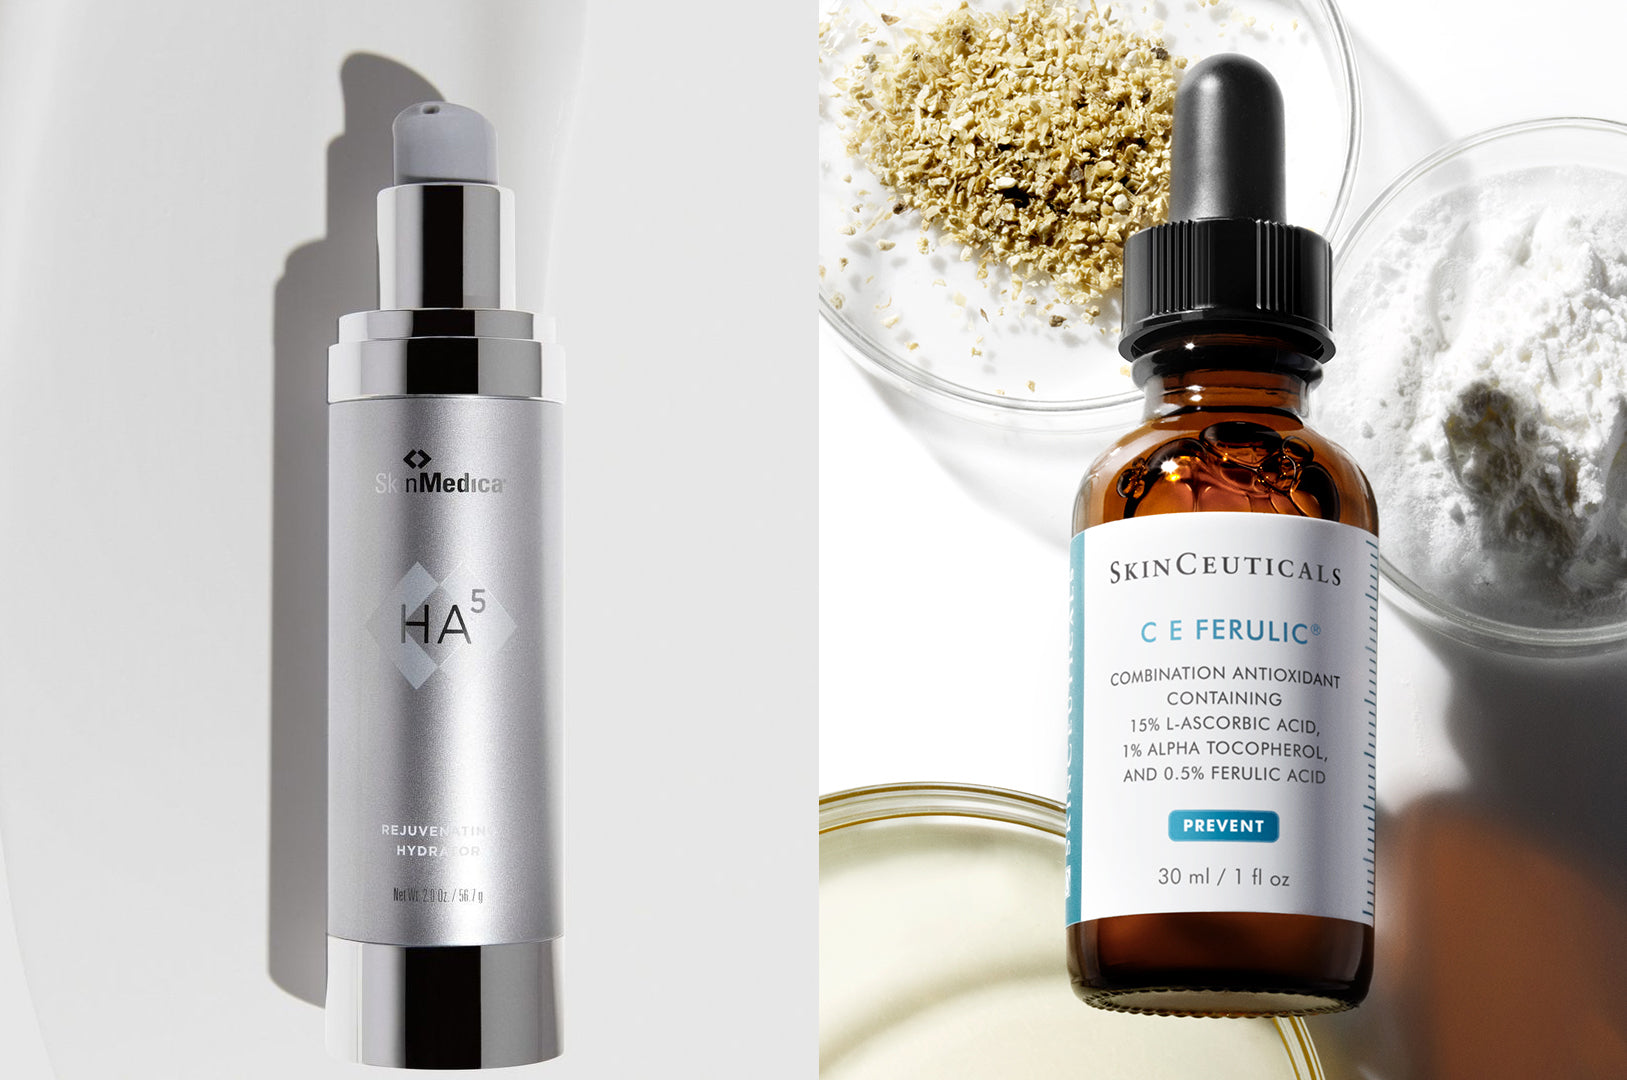 SkinMedica vs. SkinCeuticals: Let's Compare These 2 Top Medical-Grade Brands